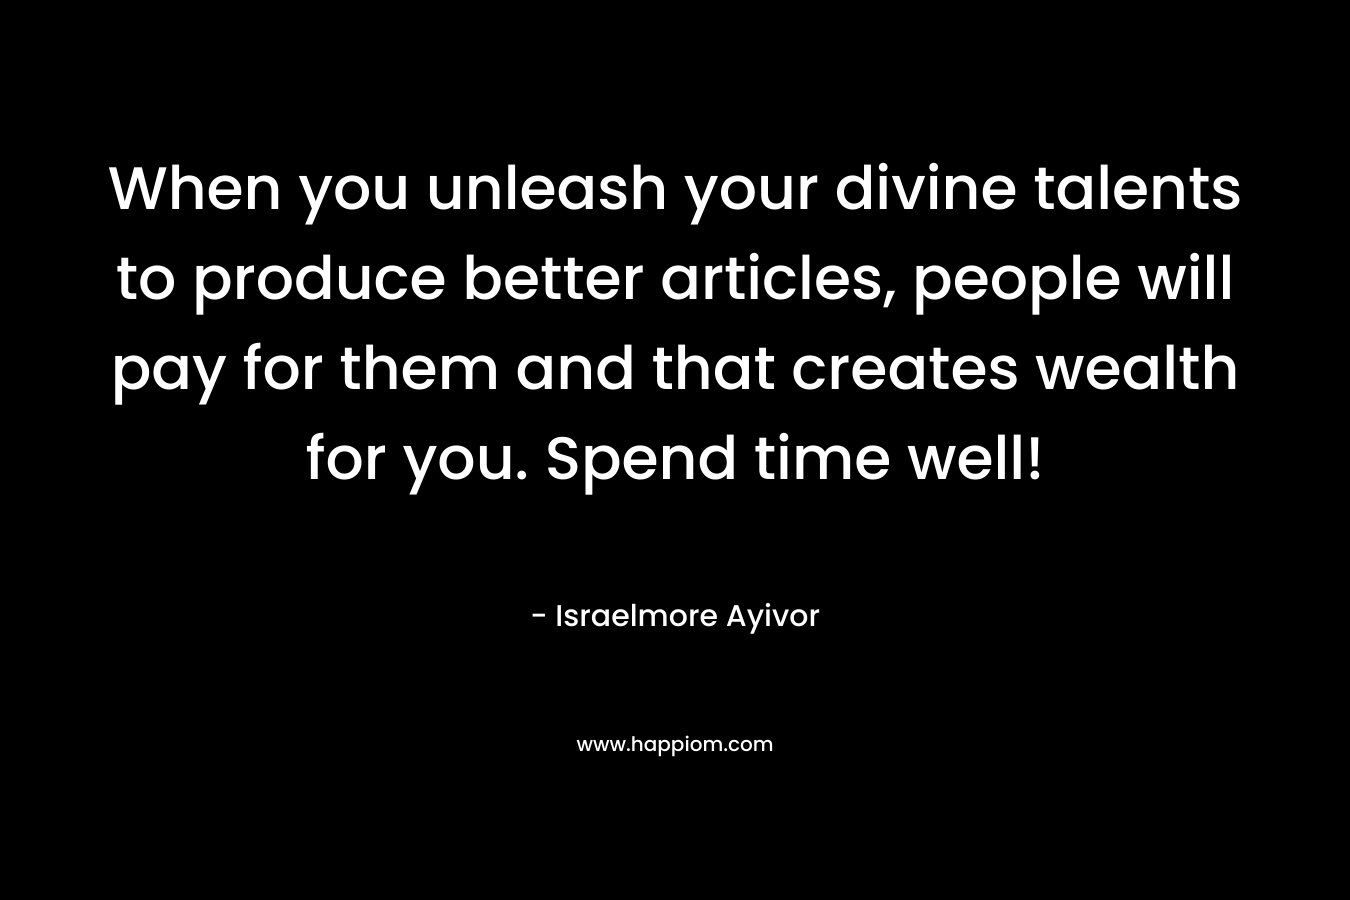 When you unleash your divine talents to produce better articles, people will pay for them and that creates wealth for you. Spend time well! – Israelmore Ayivor